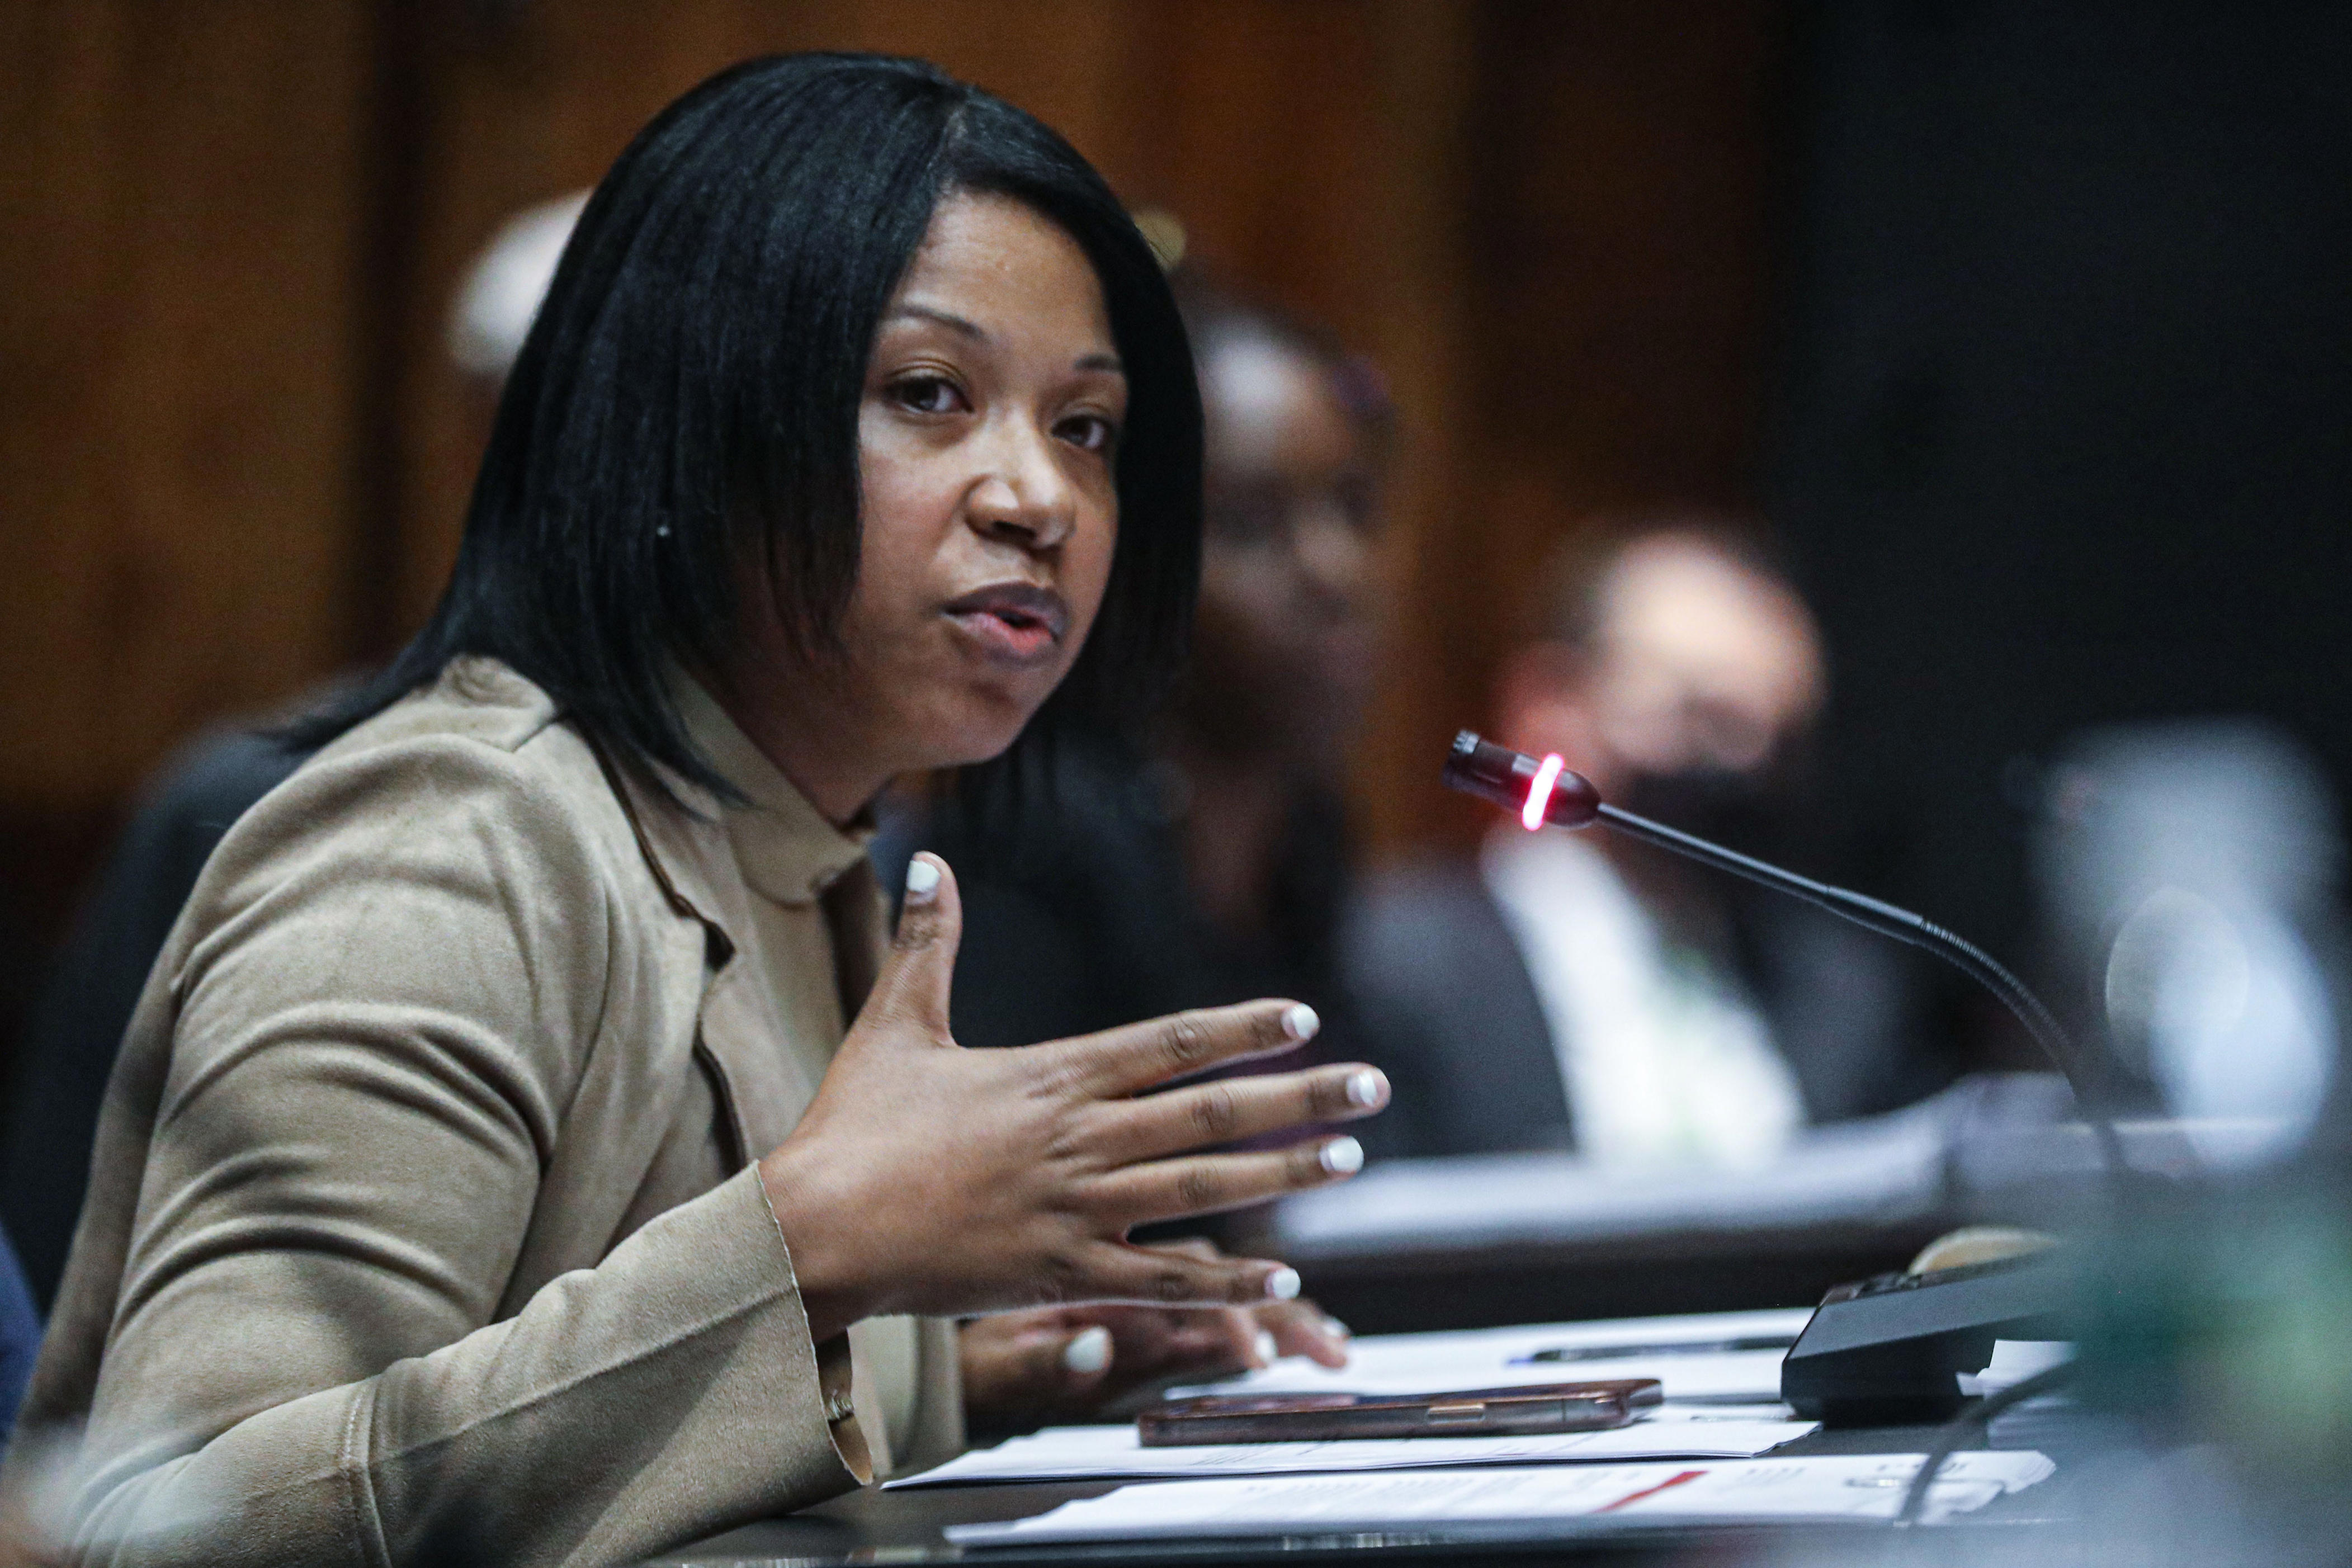 yonkers councilwoman loses leadership role after claims of violent words against colleague